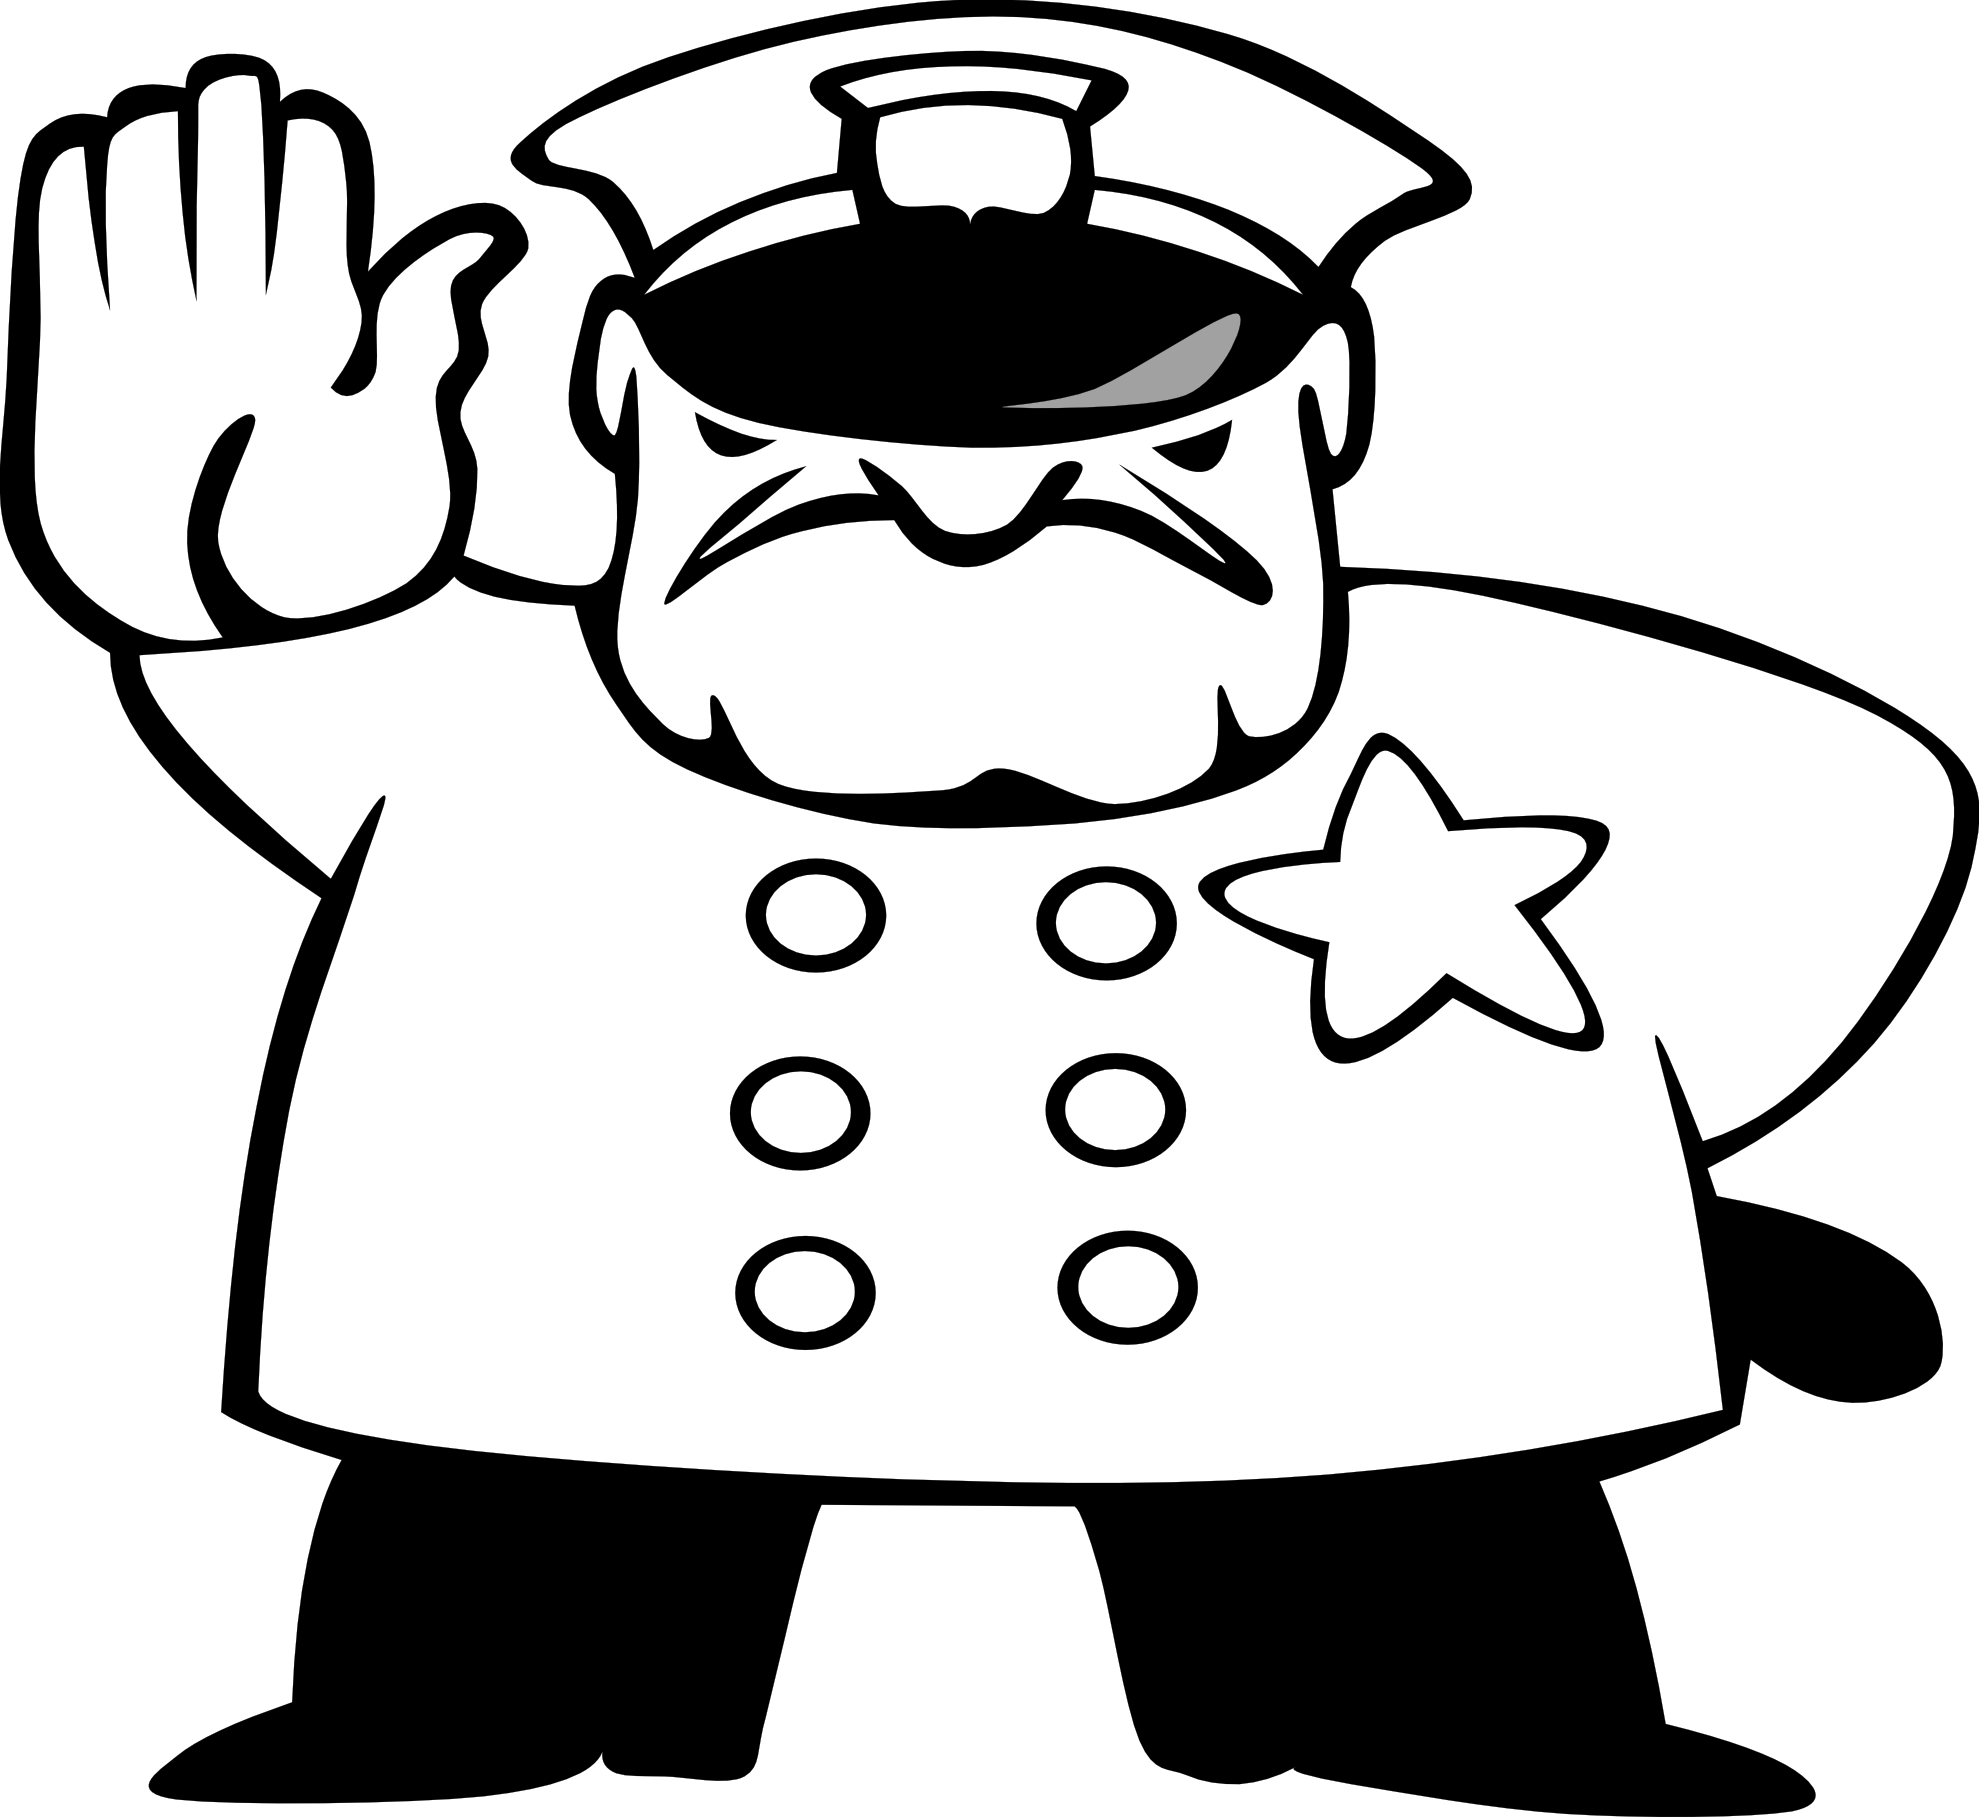 Police Man Black White | Clipart Panda - Free Clipart Images